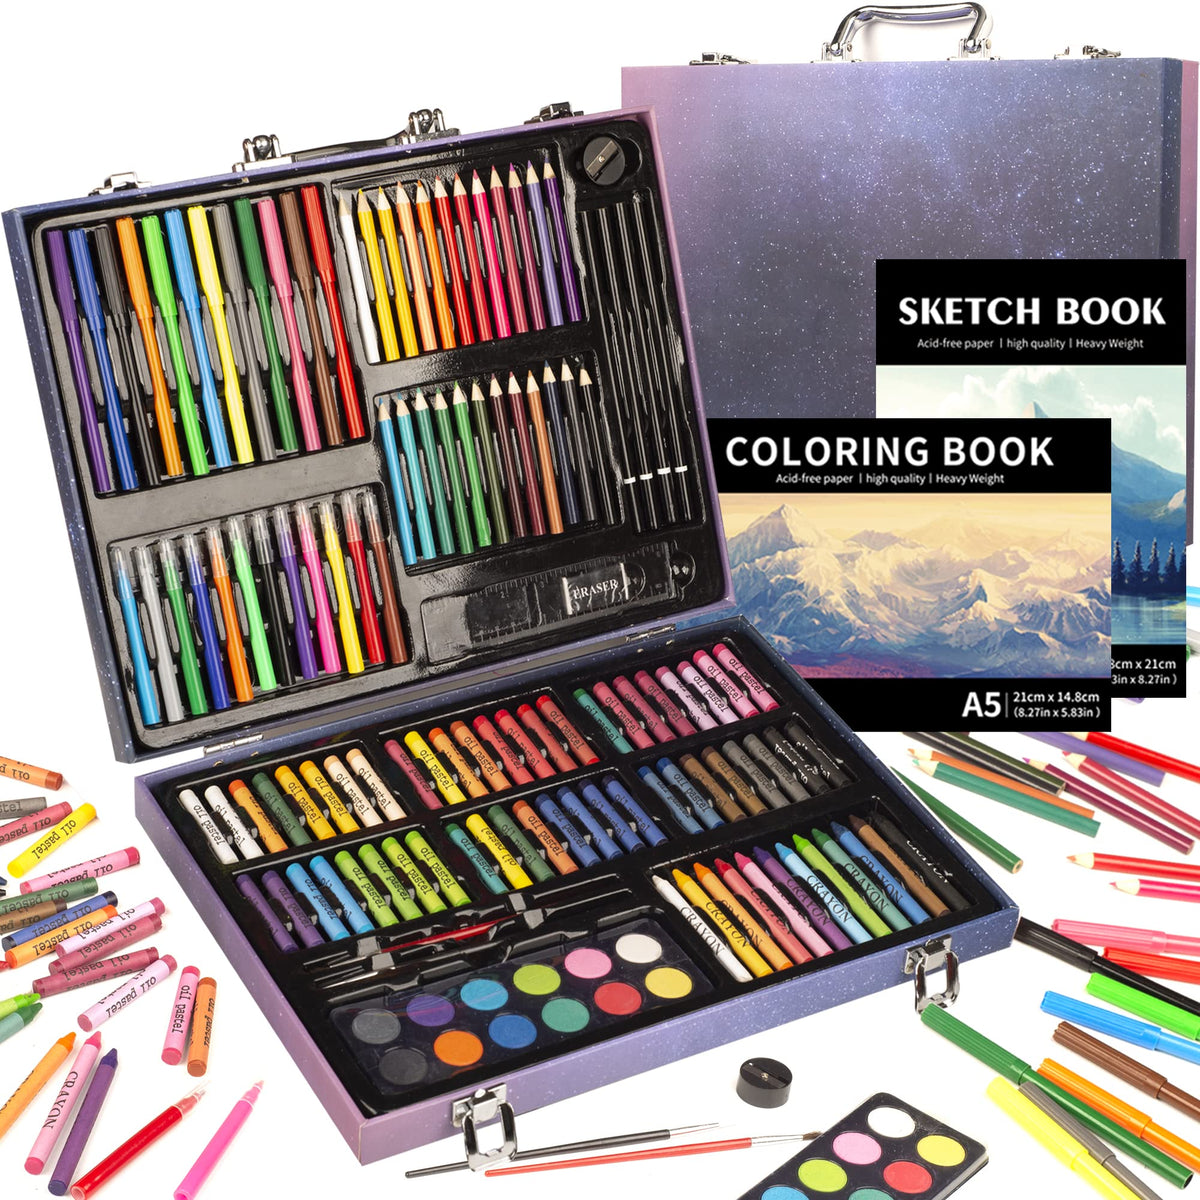  143 PCS Deluxe Art Set Artist Drawing&Painting Set,Art Supplies  with Wooden Case Crafts-Professional Art Kit for Kids Teens and Adults  Artist